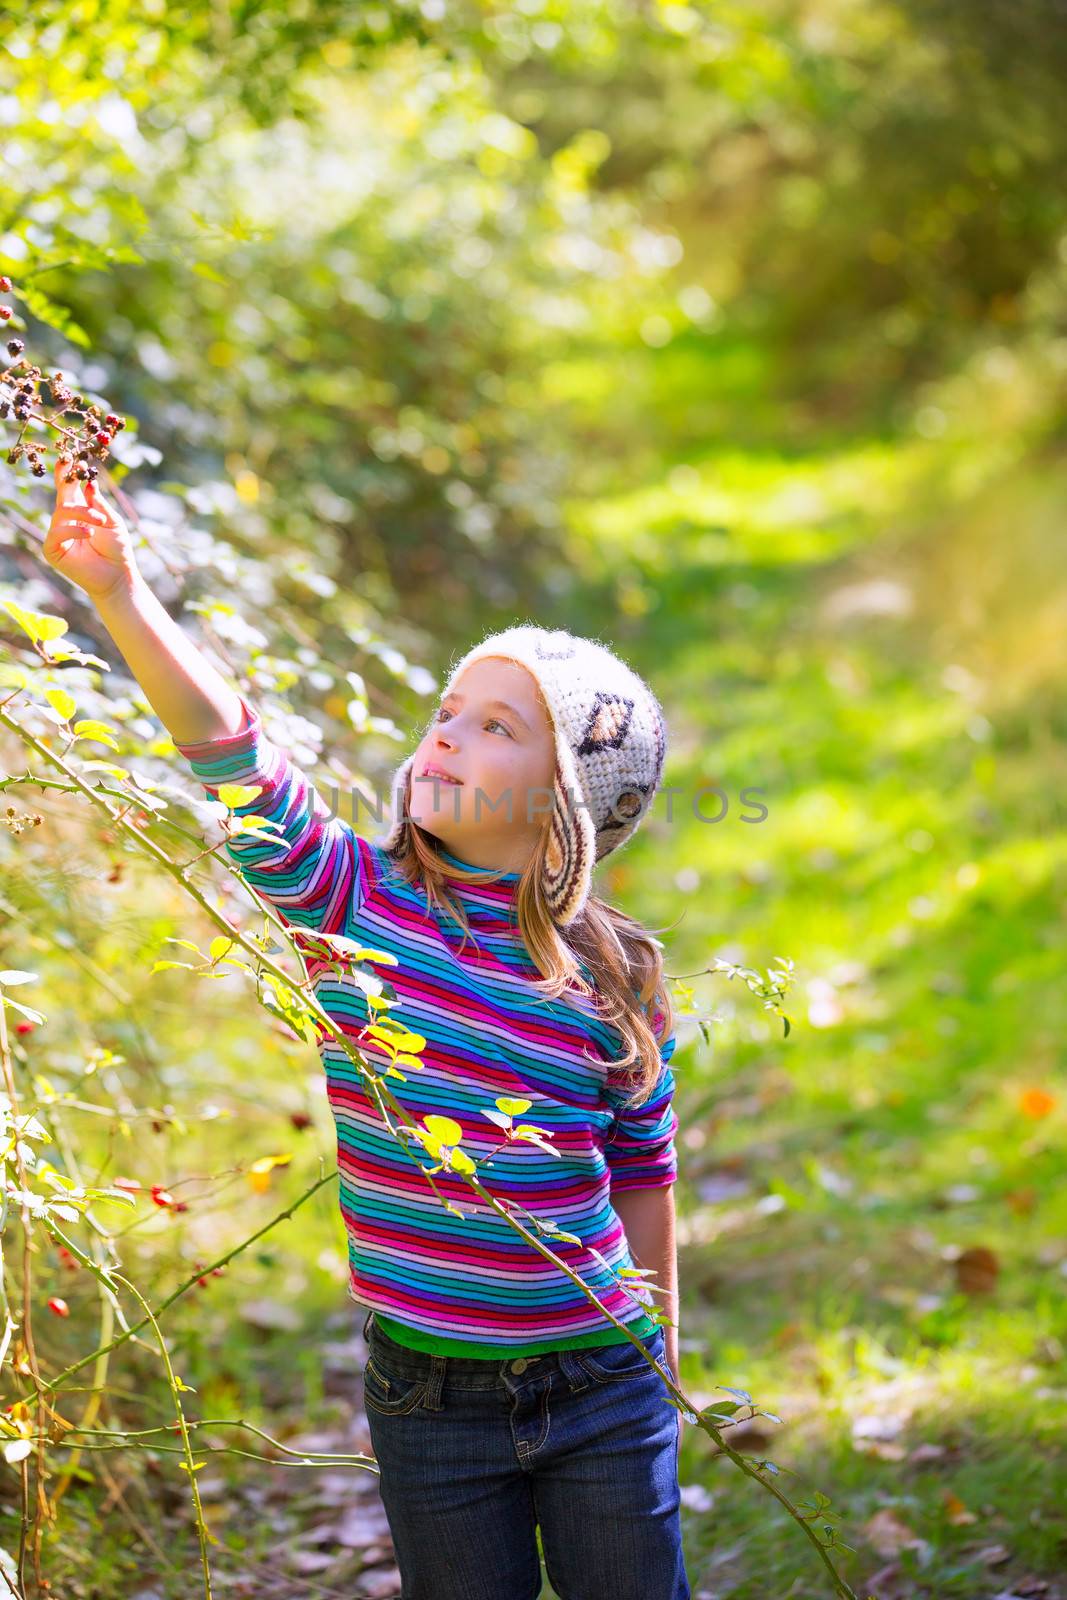 kid winter girl picking mulberry berries in the forest with wool cap